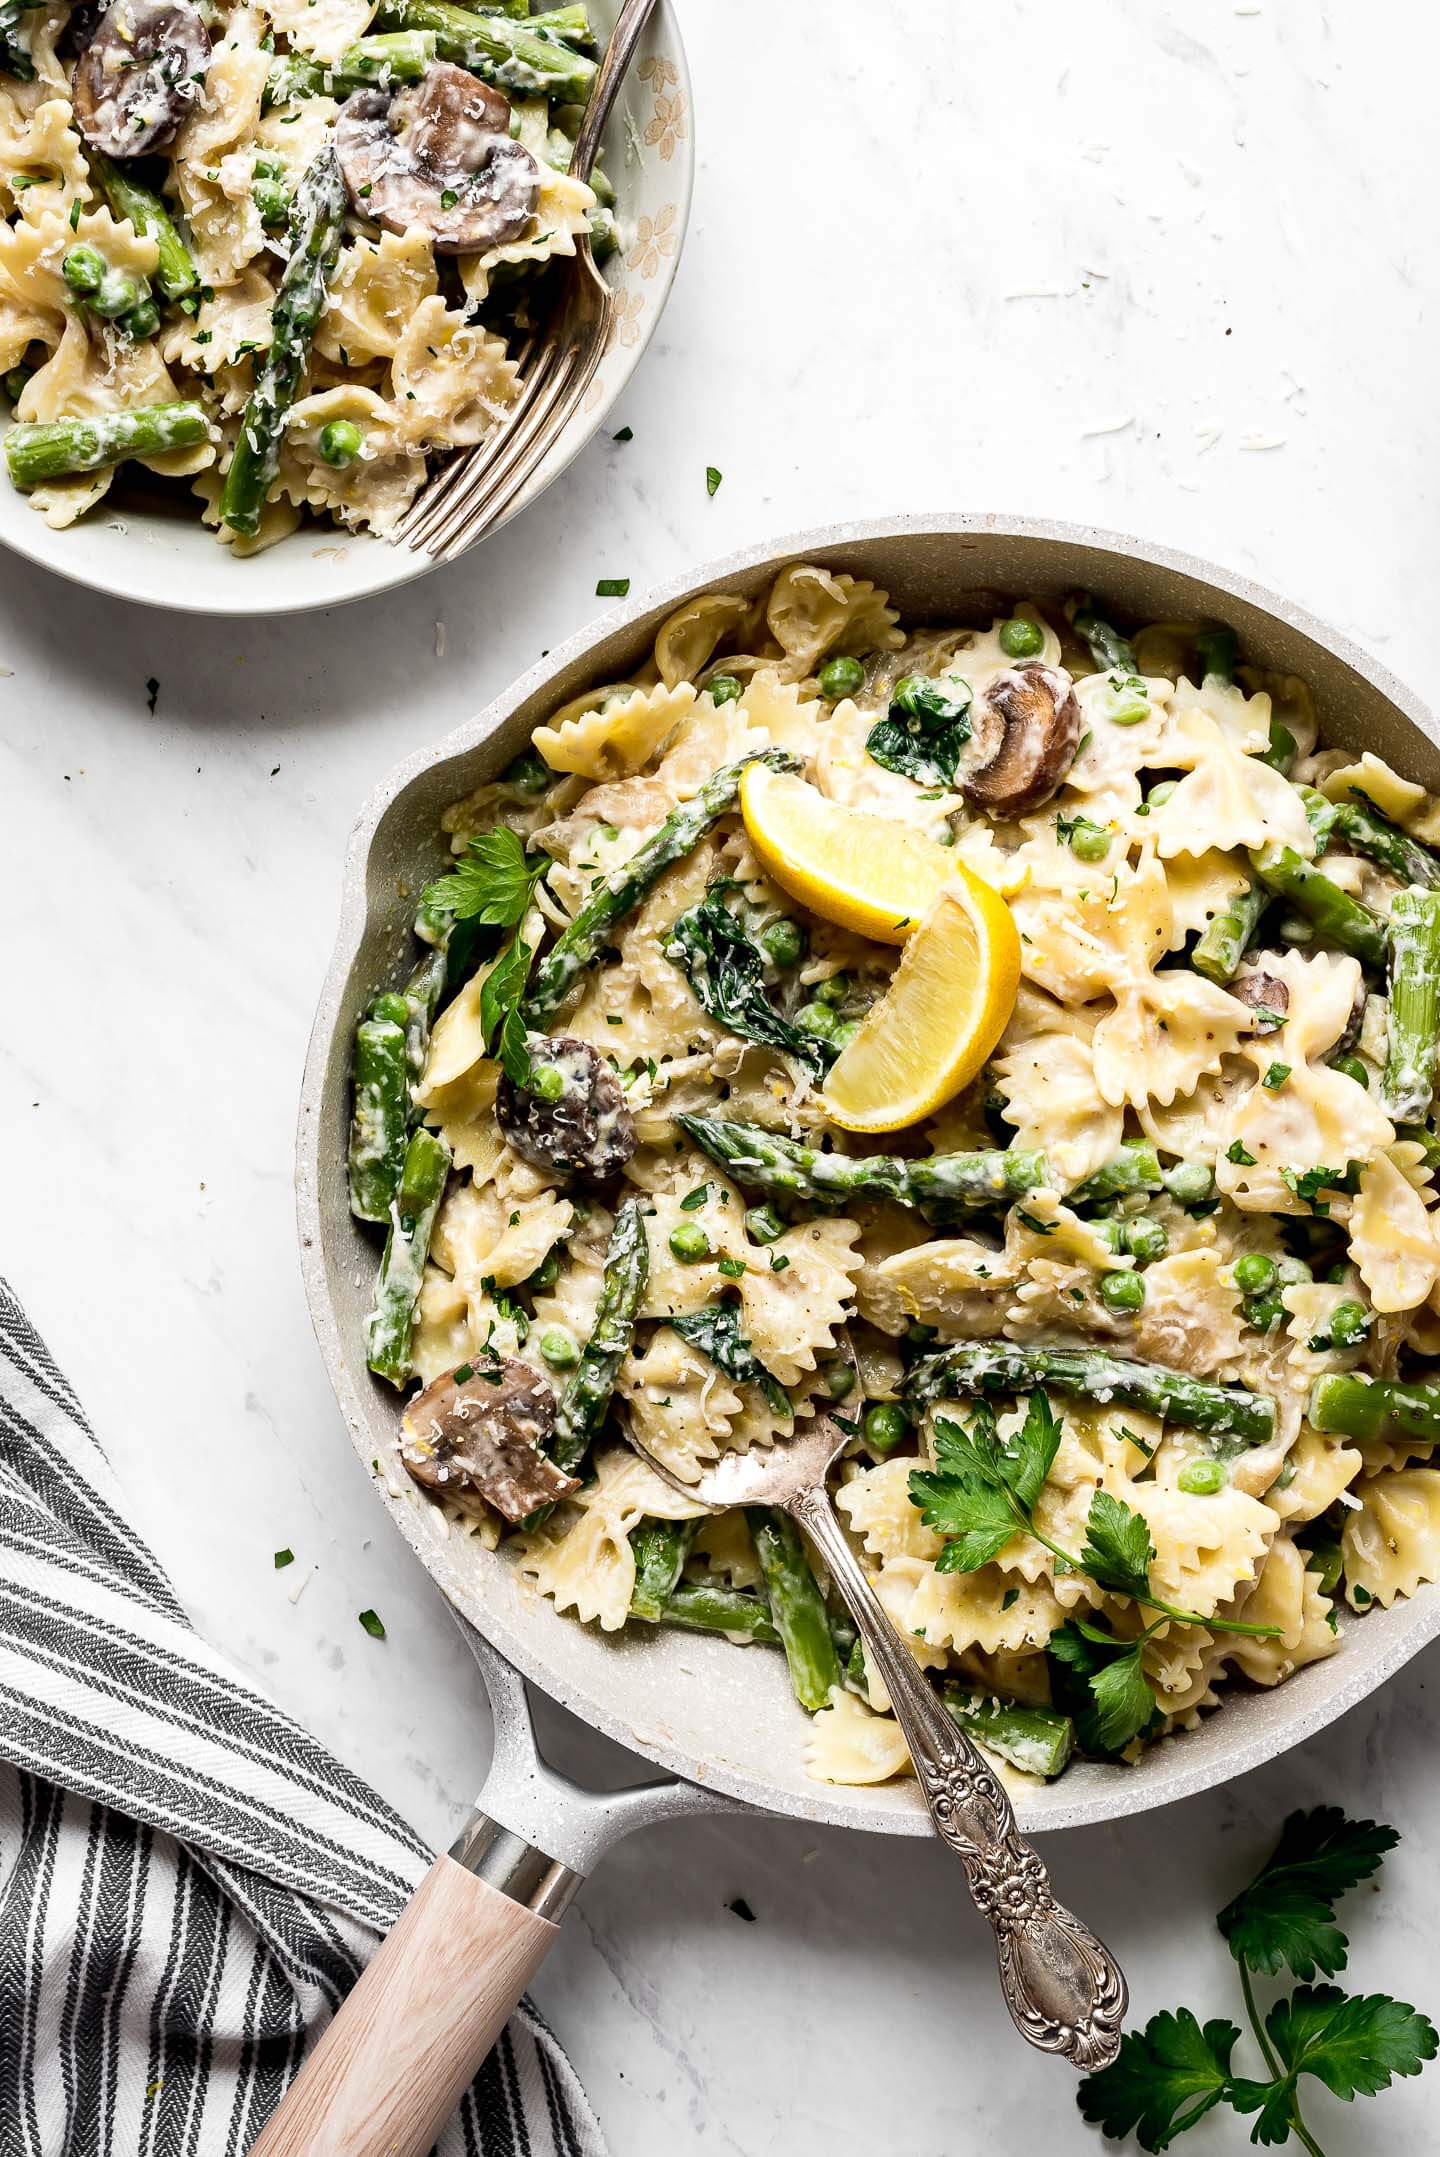 A large skillet of Creamy Asparagus Pasta with lemons.